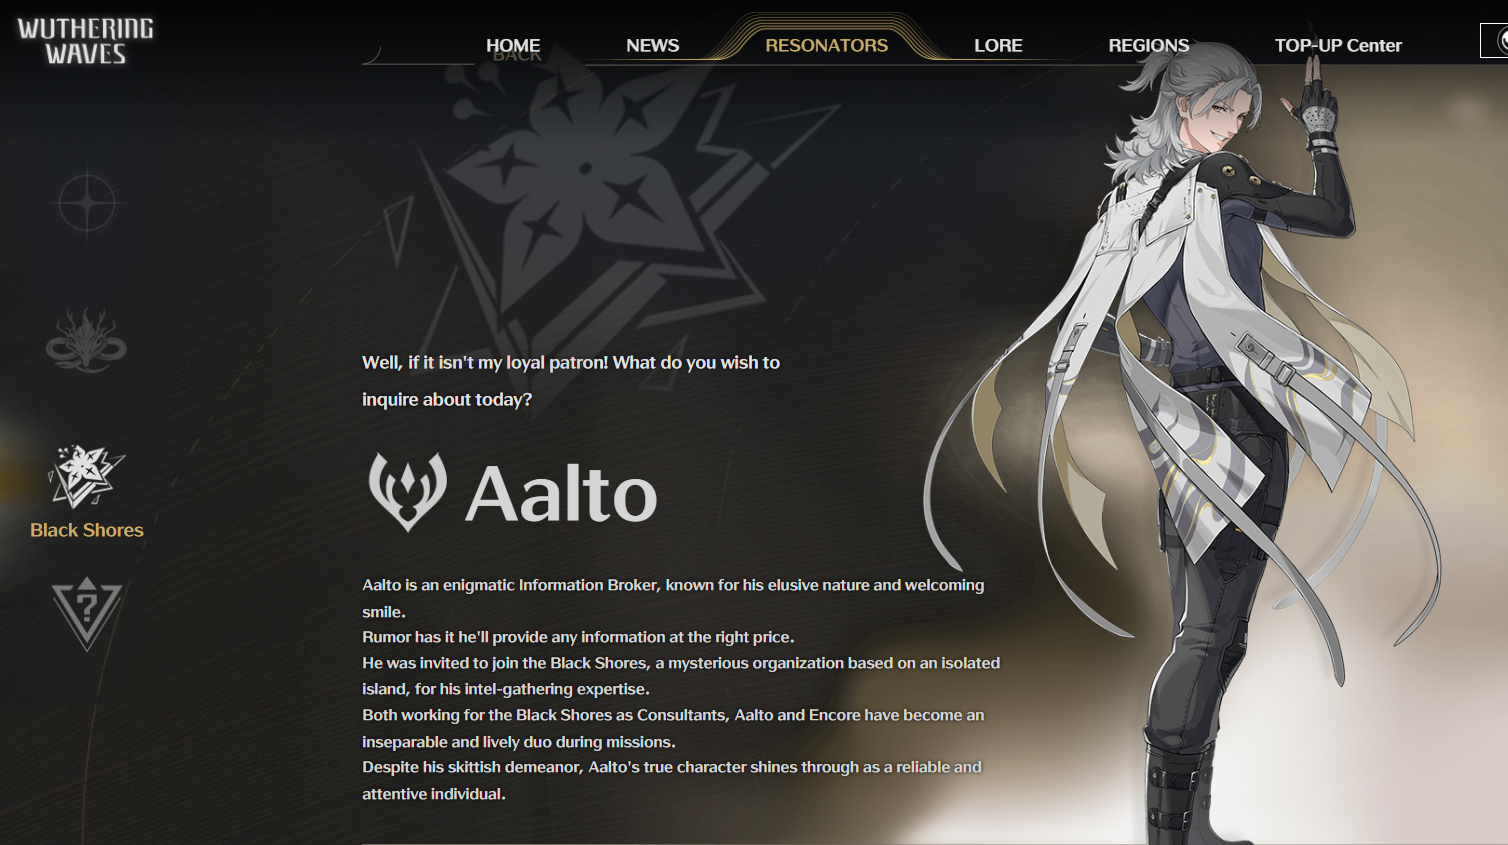 The official Wuthering Waves page for Aalto.